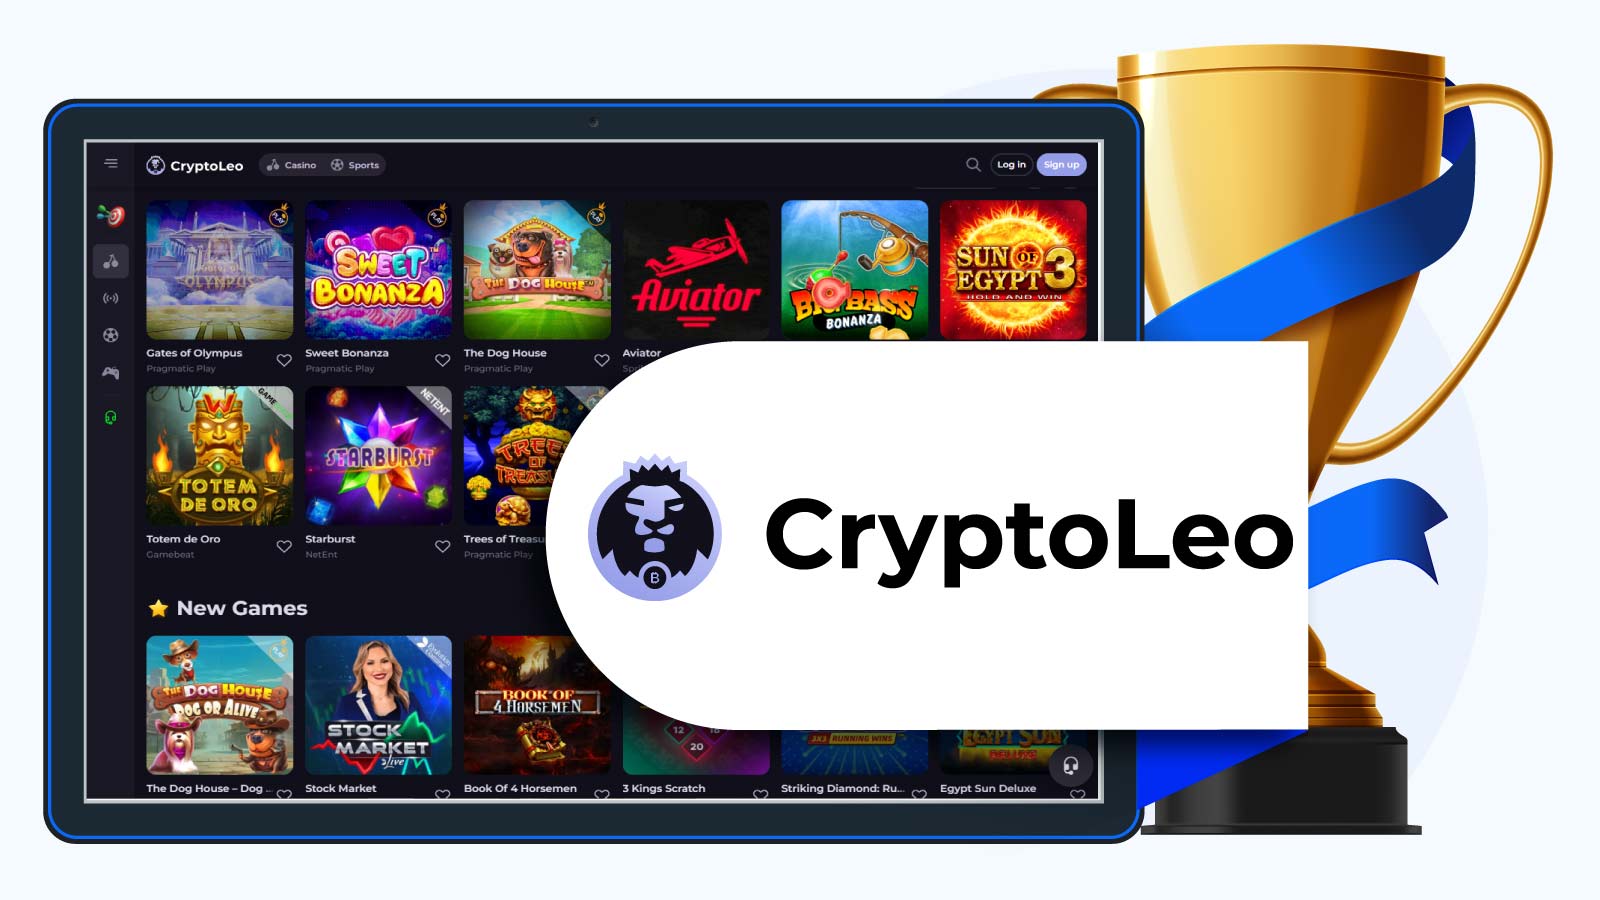 CryptoLeo Our Pick For The Best Online Casino All-Around